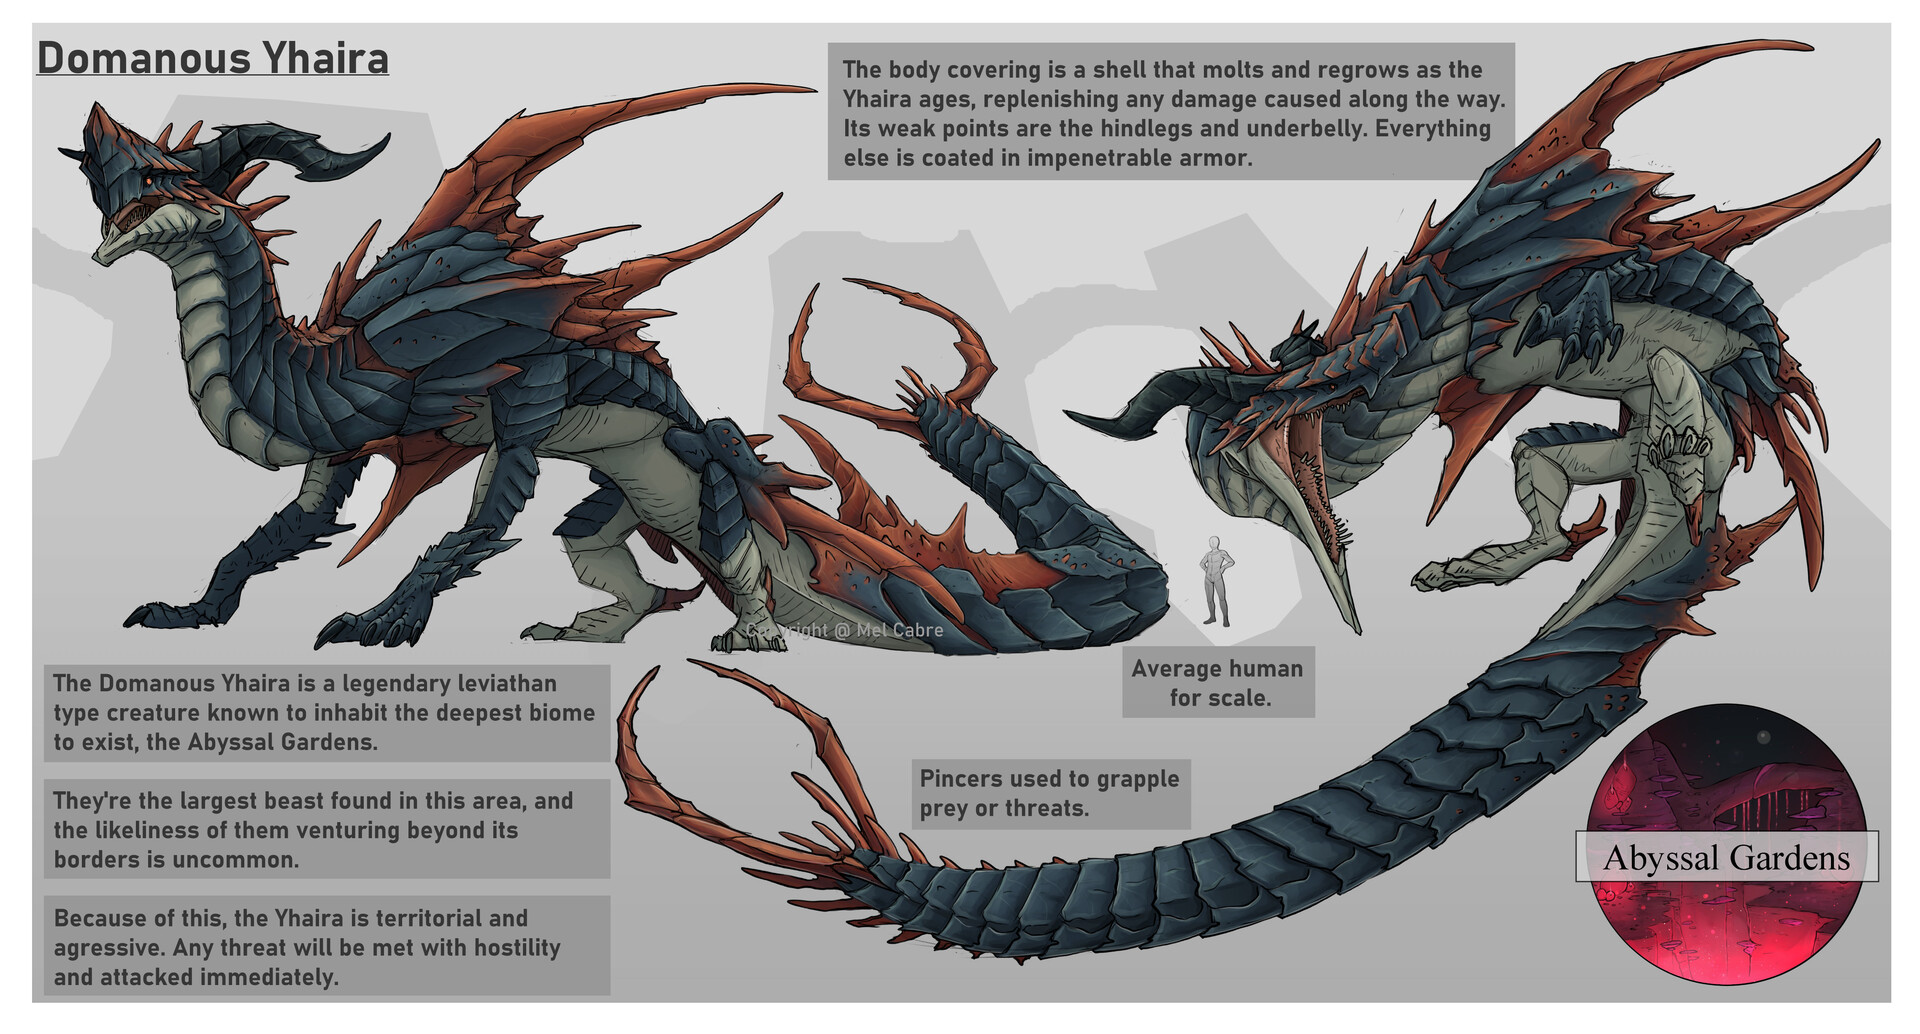 The Aereis - CHAPTER. I  Mythical creatures art, Creature design, Creature  drawings